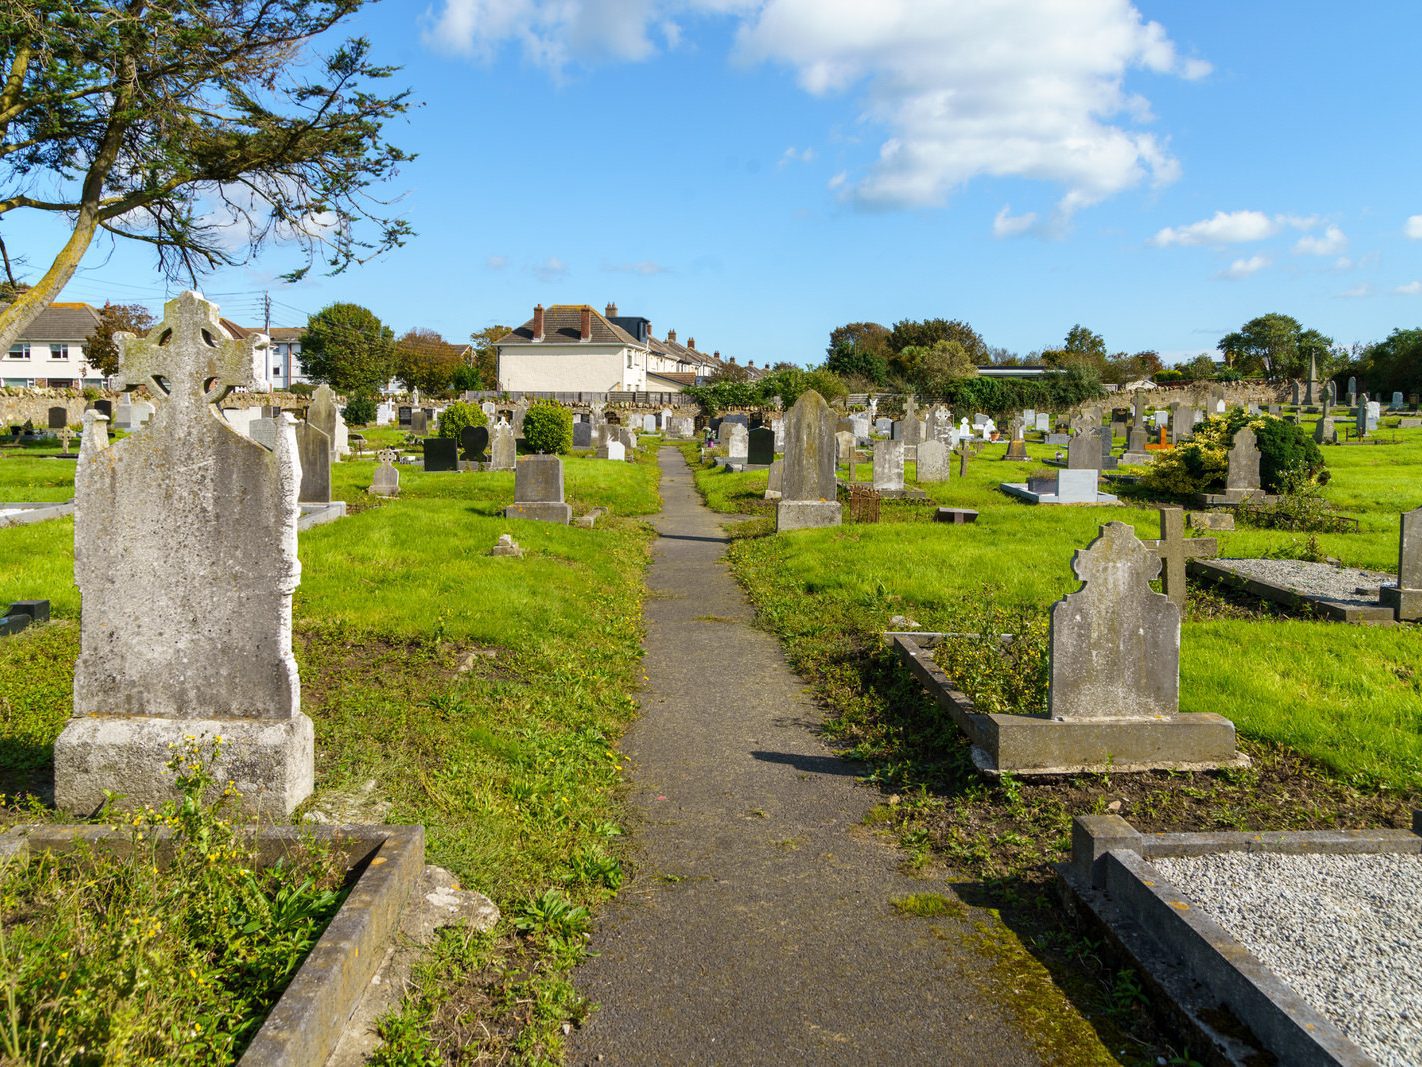 TODAY I MANAGED TO VISIT KILBARRACK CEMETERY [AFTER A NUMBER OF FAILED ATTEMPTS OVER A PERIOD OF TEN YEARS] 038